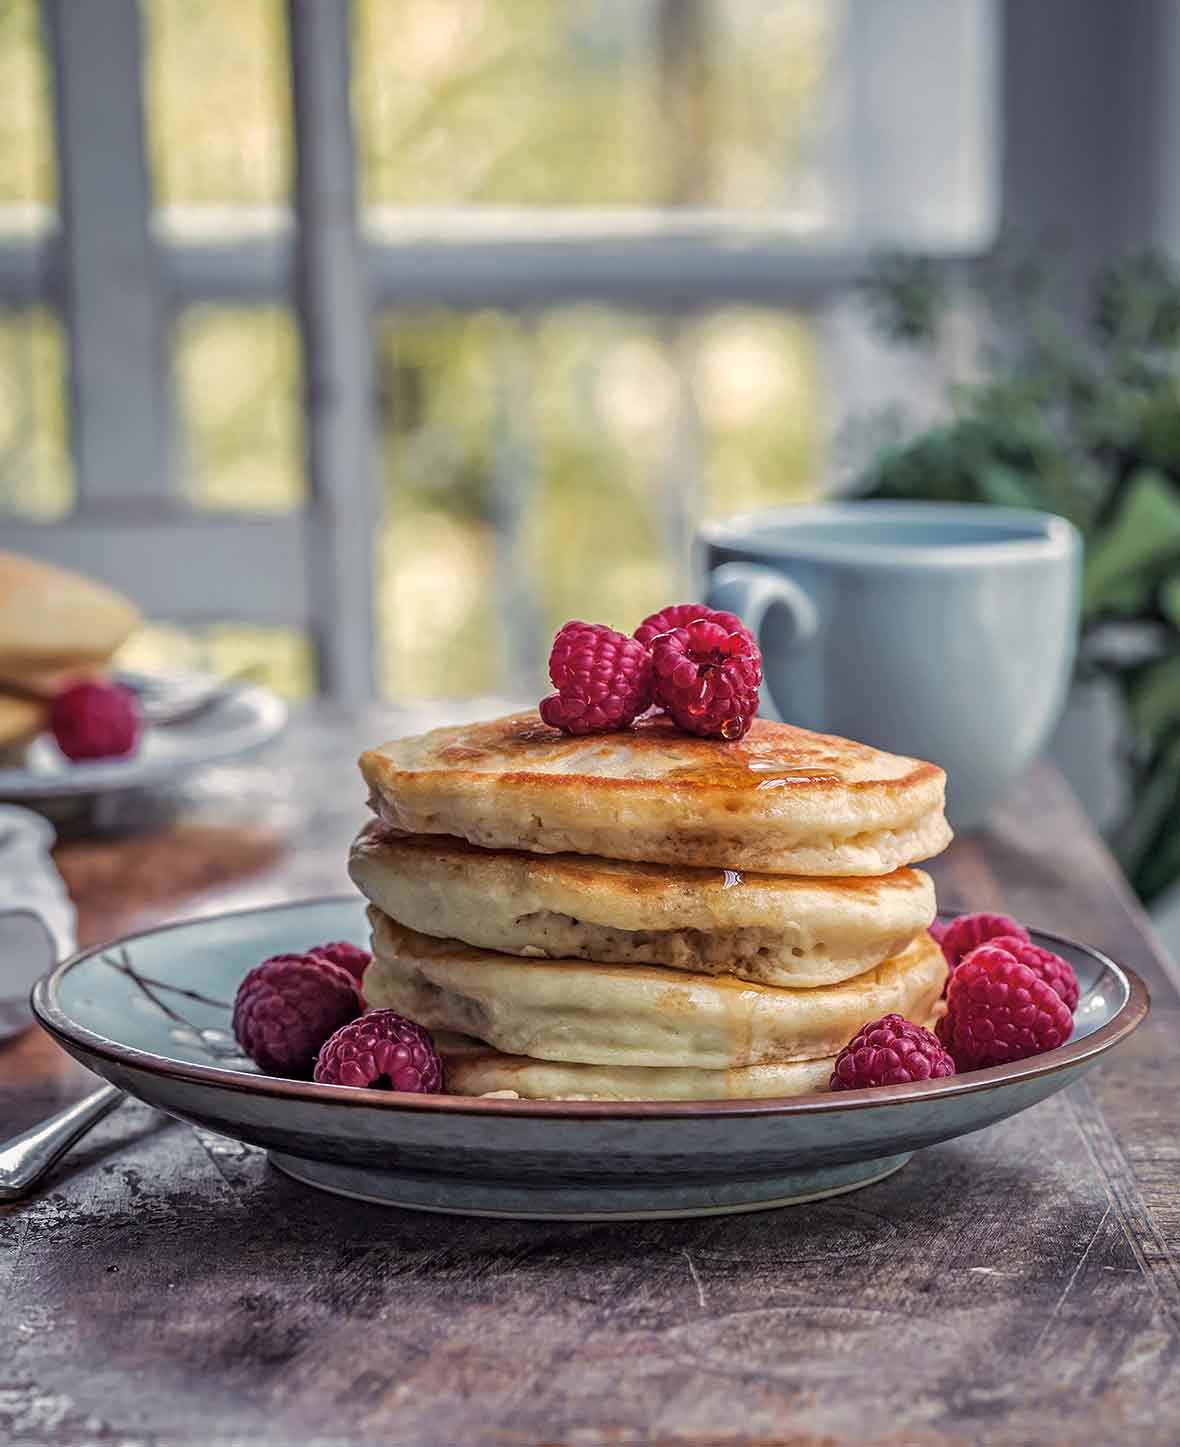 A stack of four vegan pancakes on a plate, dripping with maple syrup and topped with raspberries